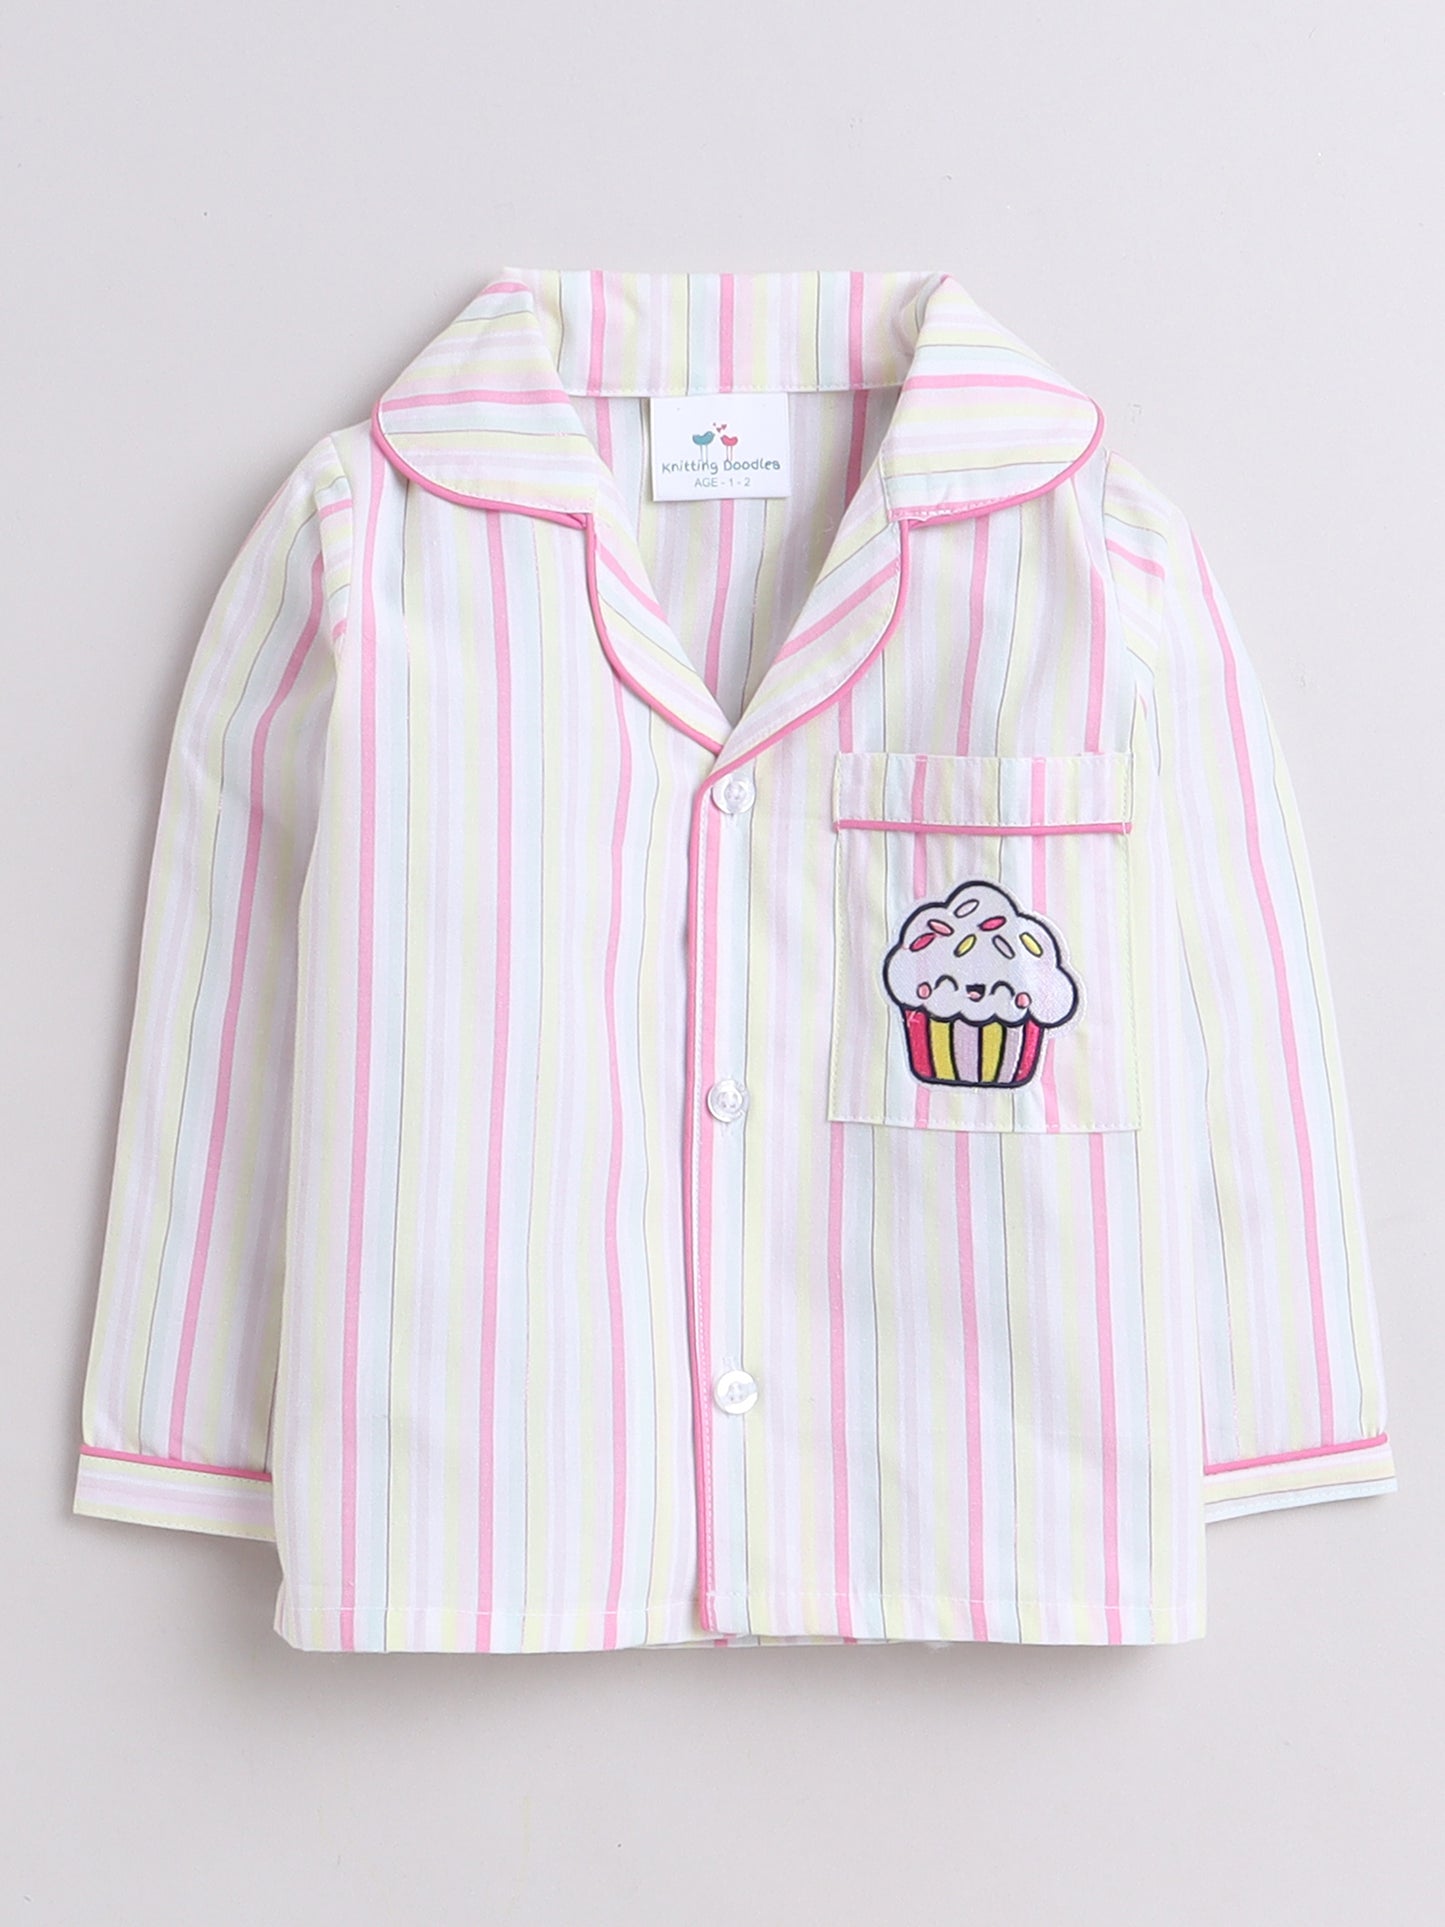 White and Pink Stripes Nightsuit with Cupcake Embrodiery on Pocket